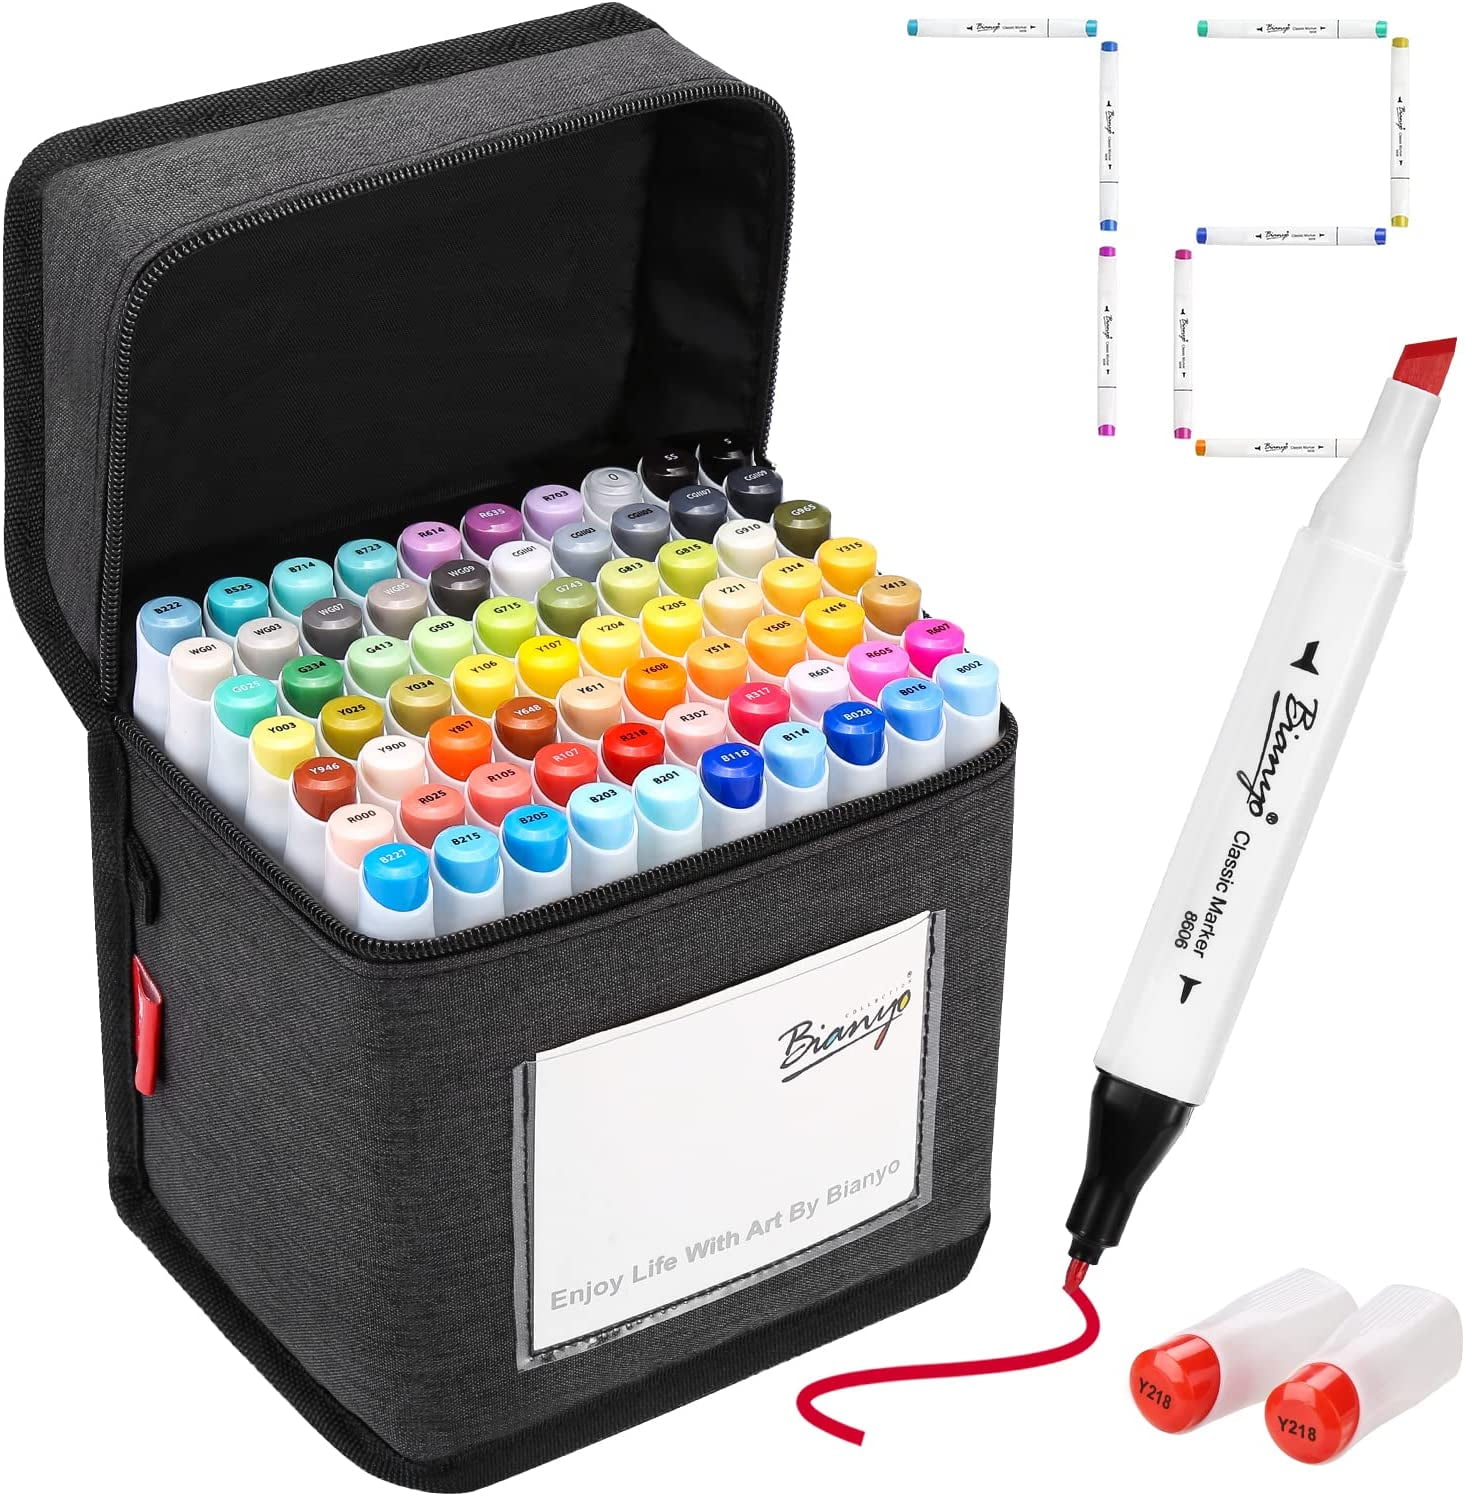 Bianyo Classic Series Alcohol-based Dual Tip Art Markers, Set of 72, Travel  Case